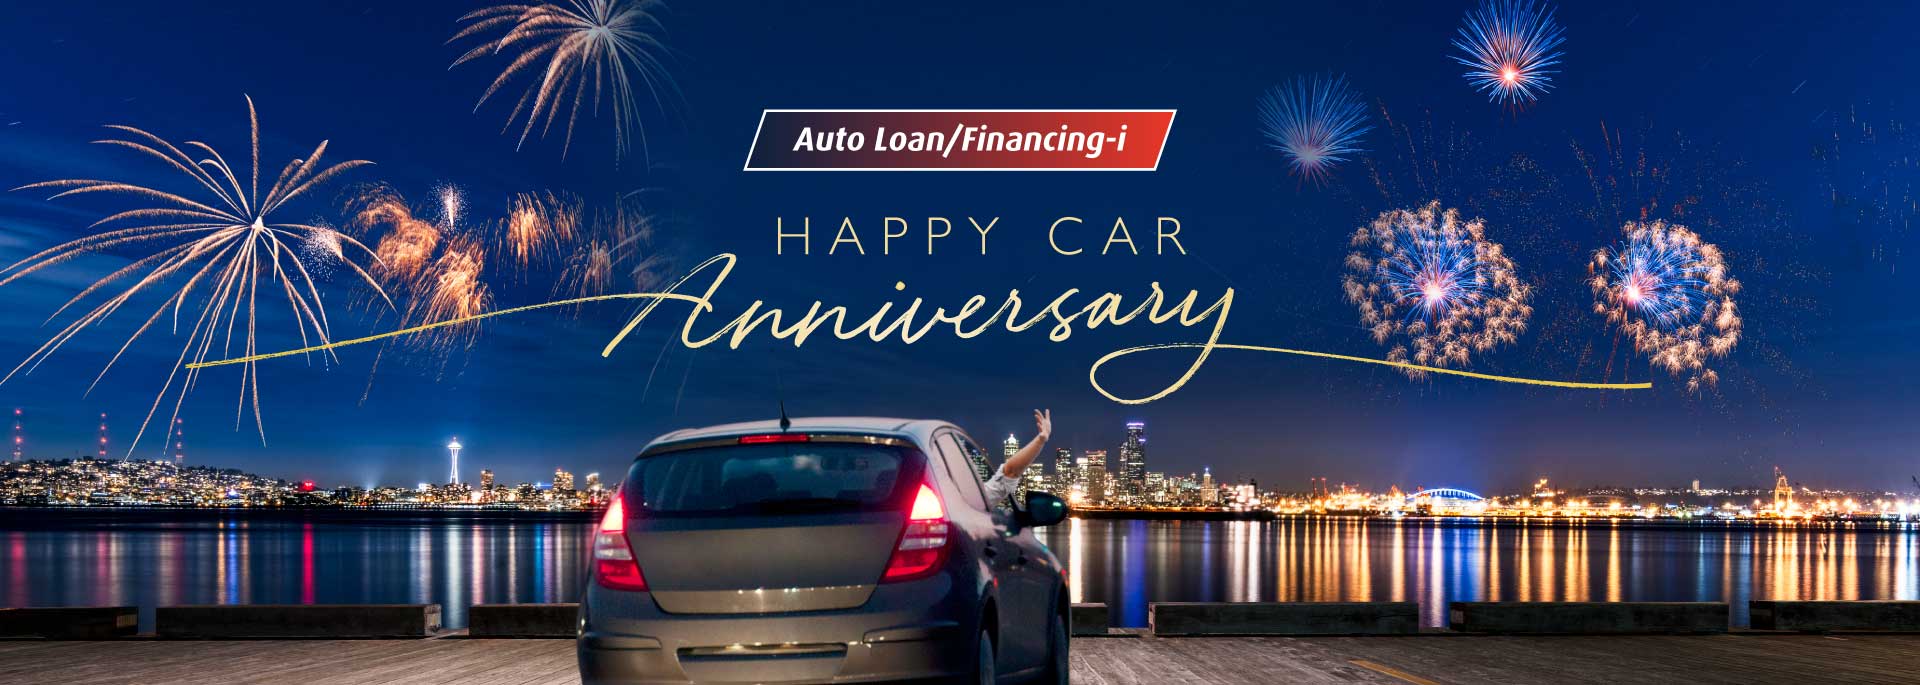 Here are some exclusive offers to celebrate your car anniversary